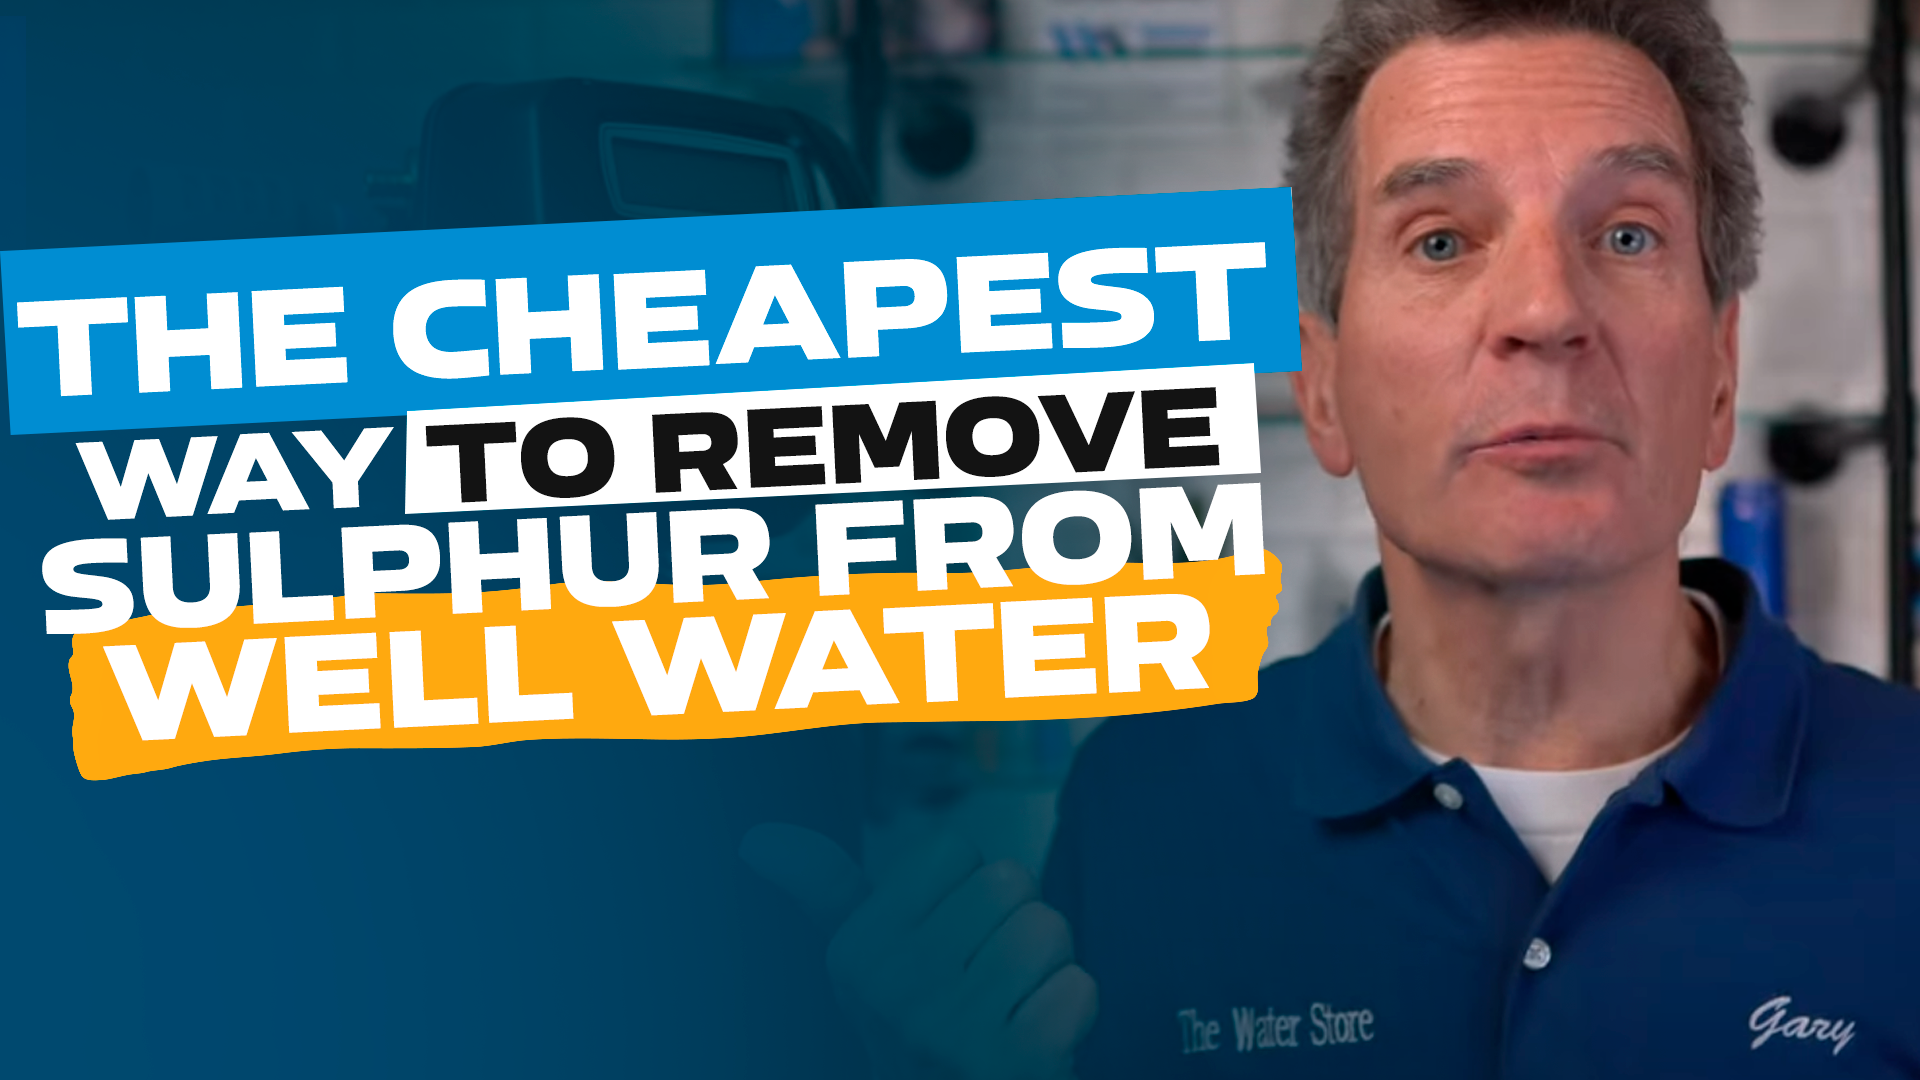 The Cheapest Way to Remove Sulphur from Well Water